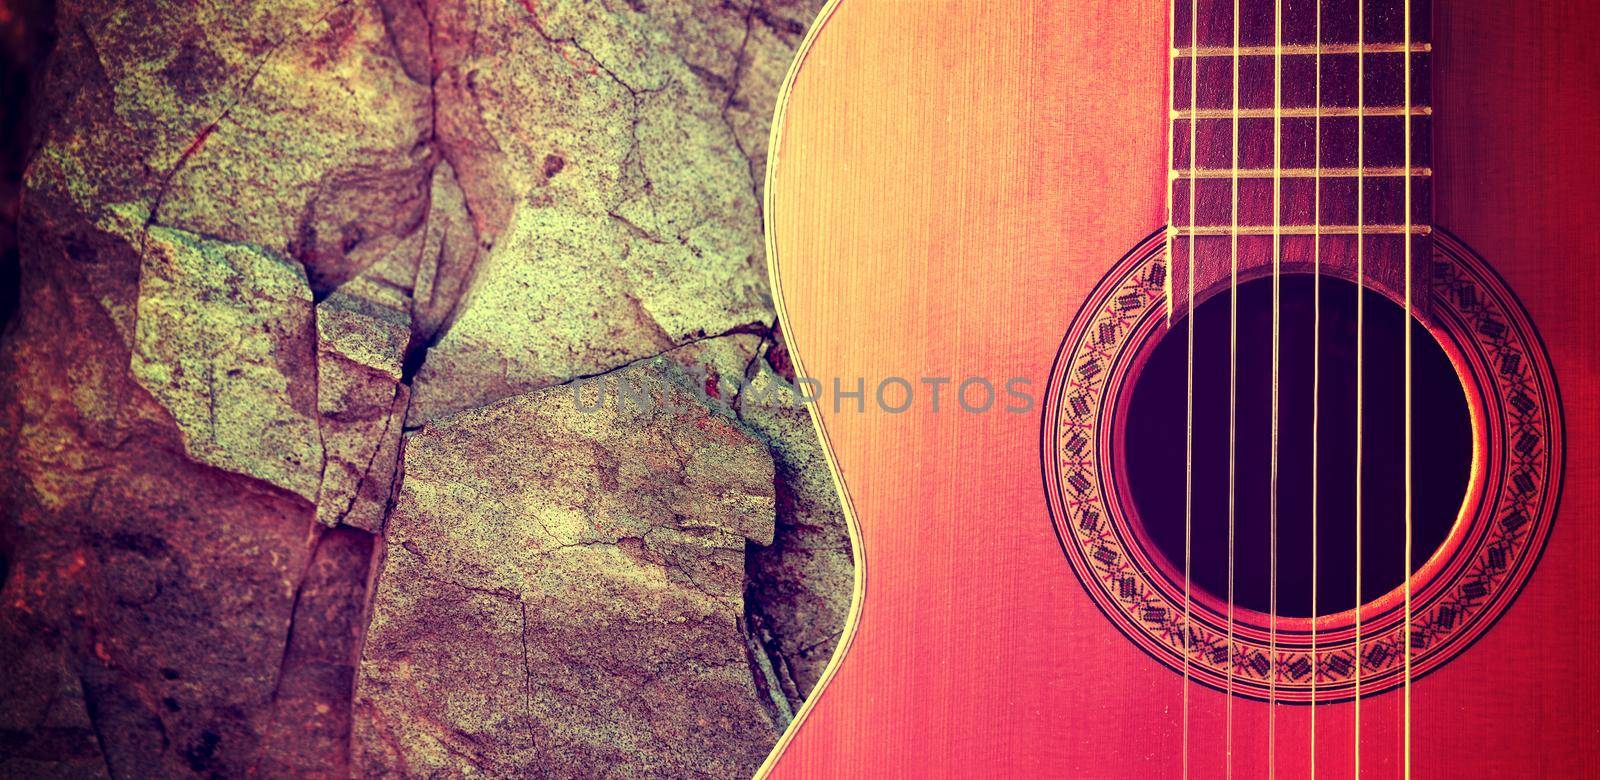 Musical design with acoustic guitar by carloscastilla